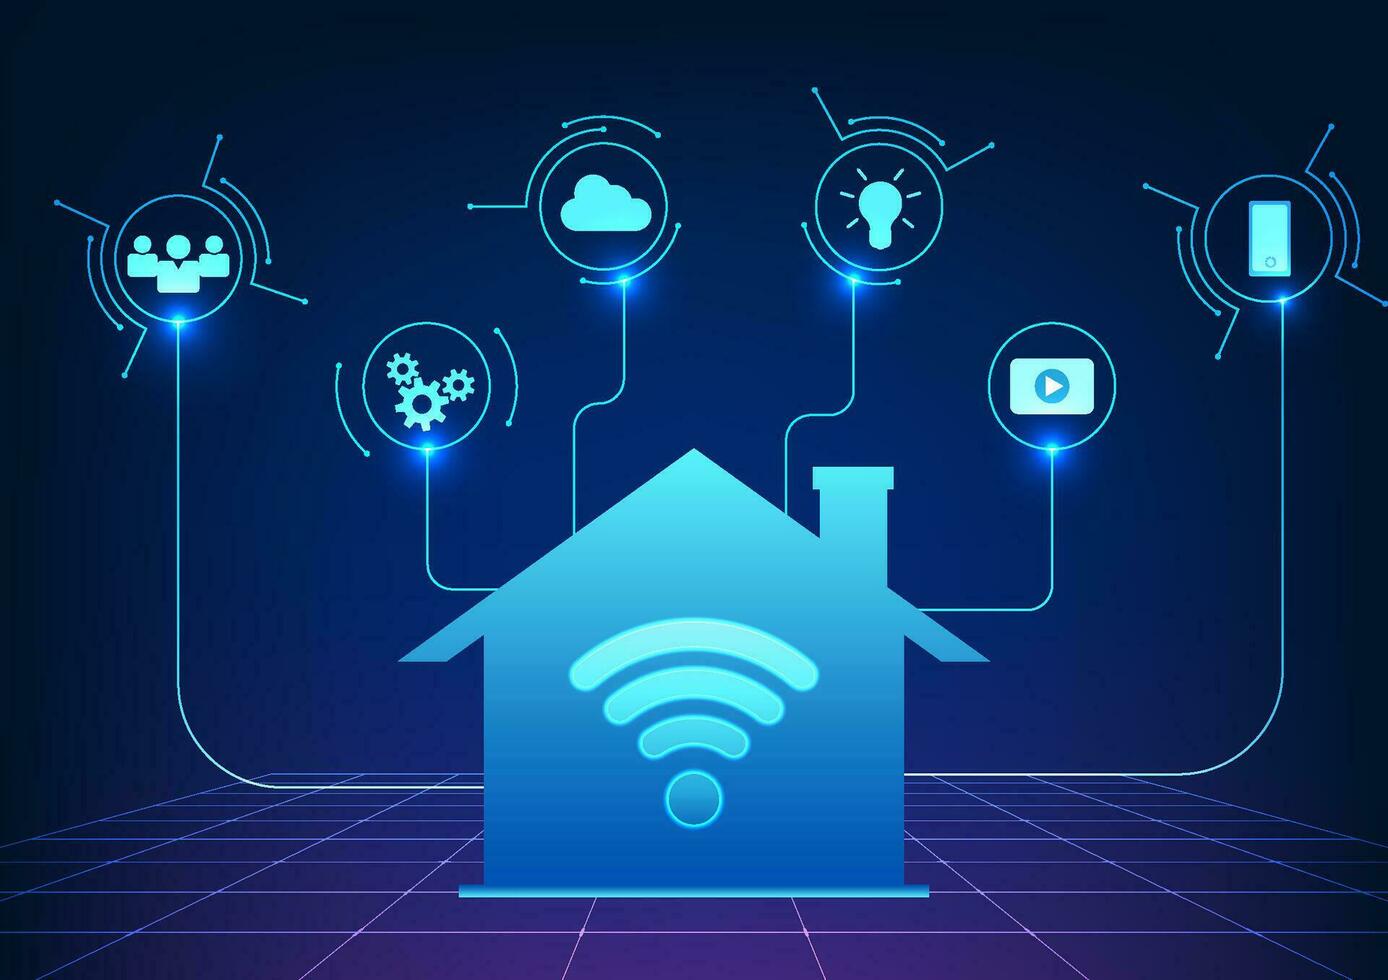 Wi-Fi technology uses a WiFi signal to distribute the signal to devices that use communication, entertainment, and business Hit by wifi icon in the house connected with the technology icon vector